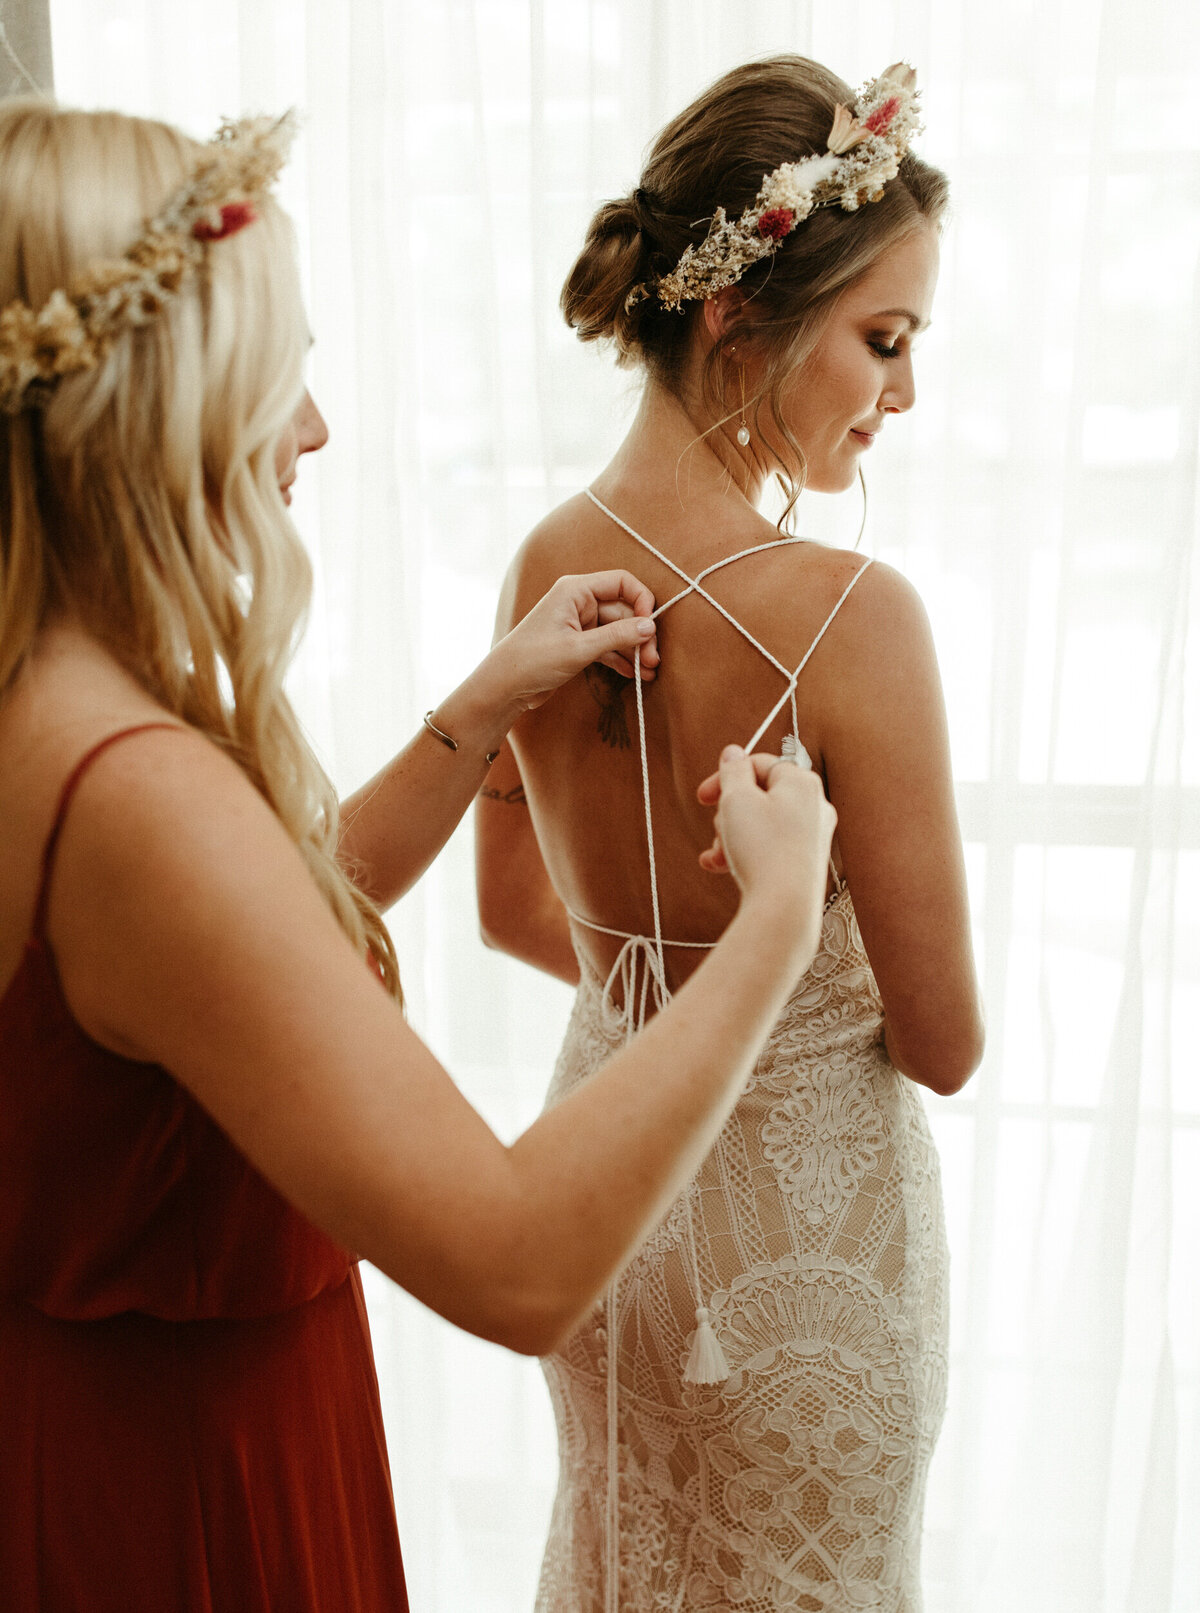 Maid of honor in flower crown helping tie the intricate straps on bride's wedding dress